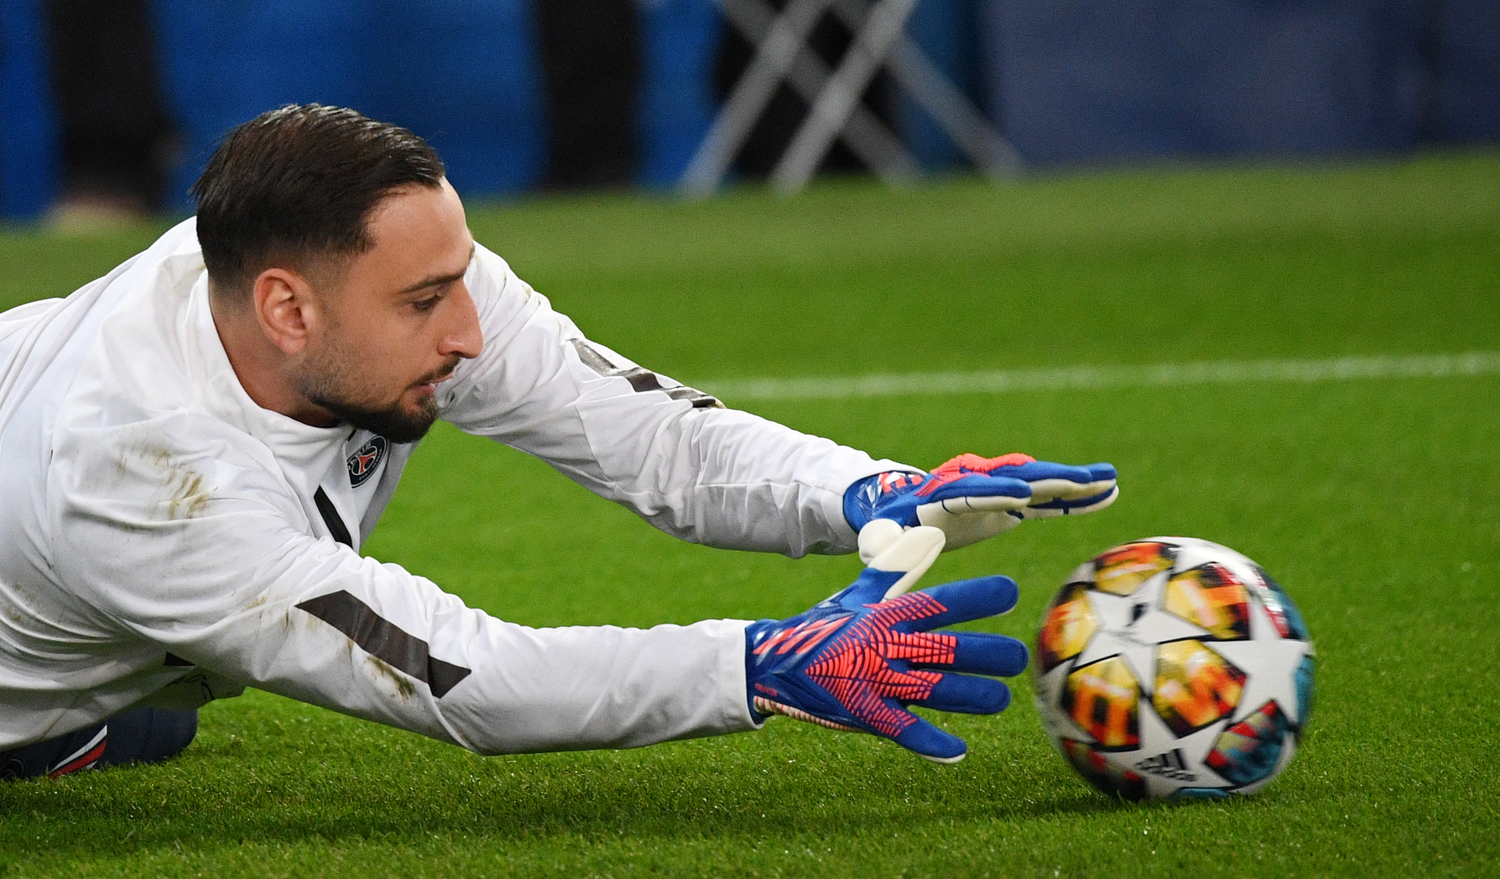 Gianluigi Donnarumma has come under scrutiny again following the draw against North Macedonia. The free kick by Enis Bardhi didn't seem uncatchable.